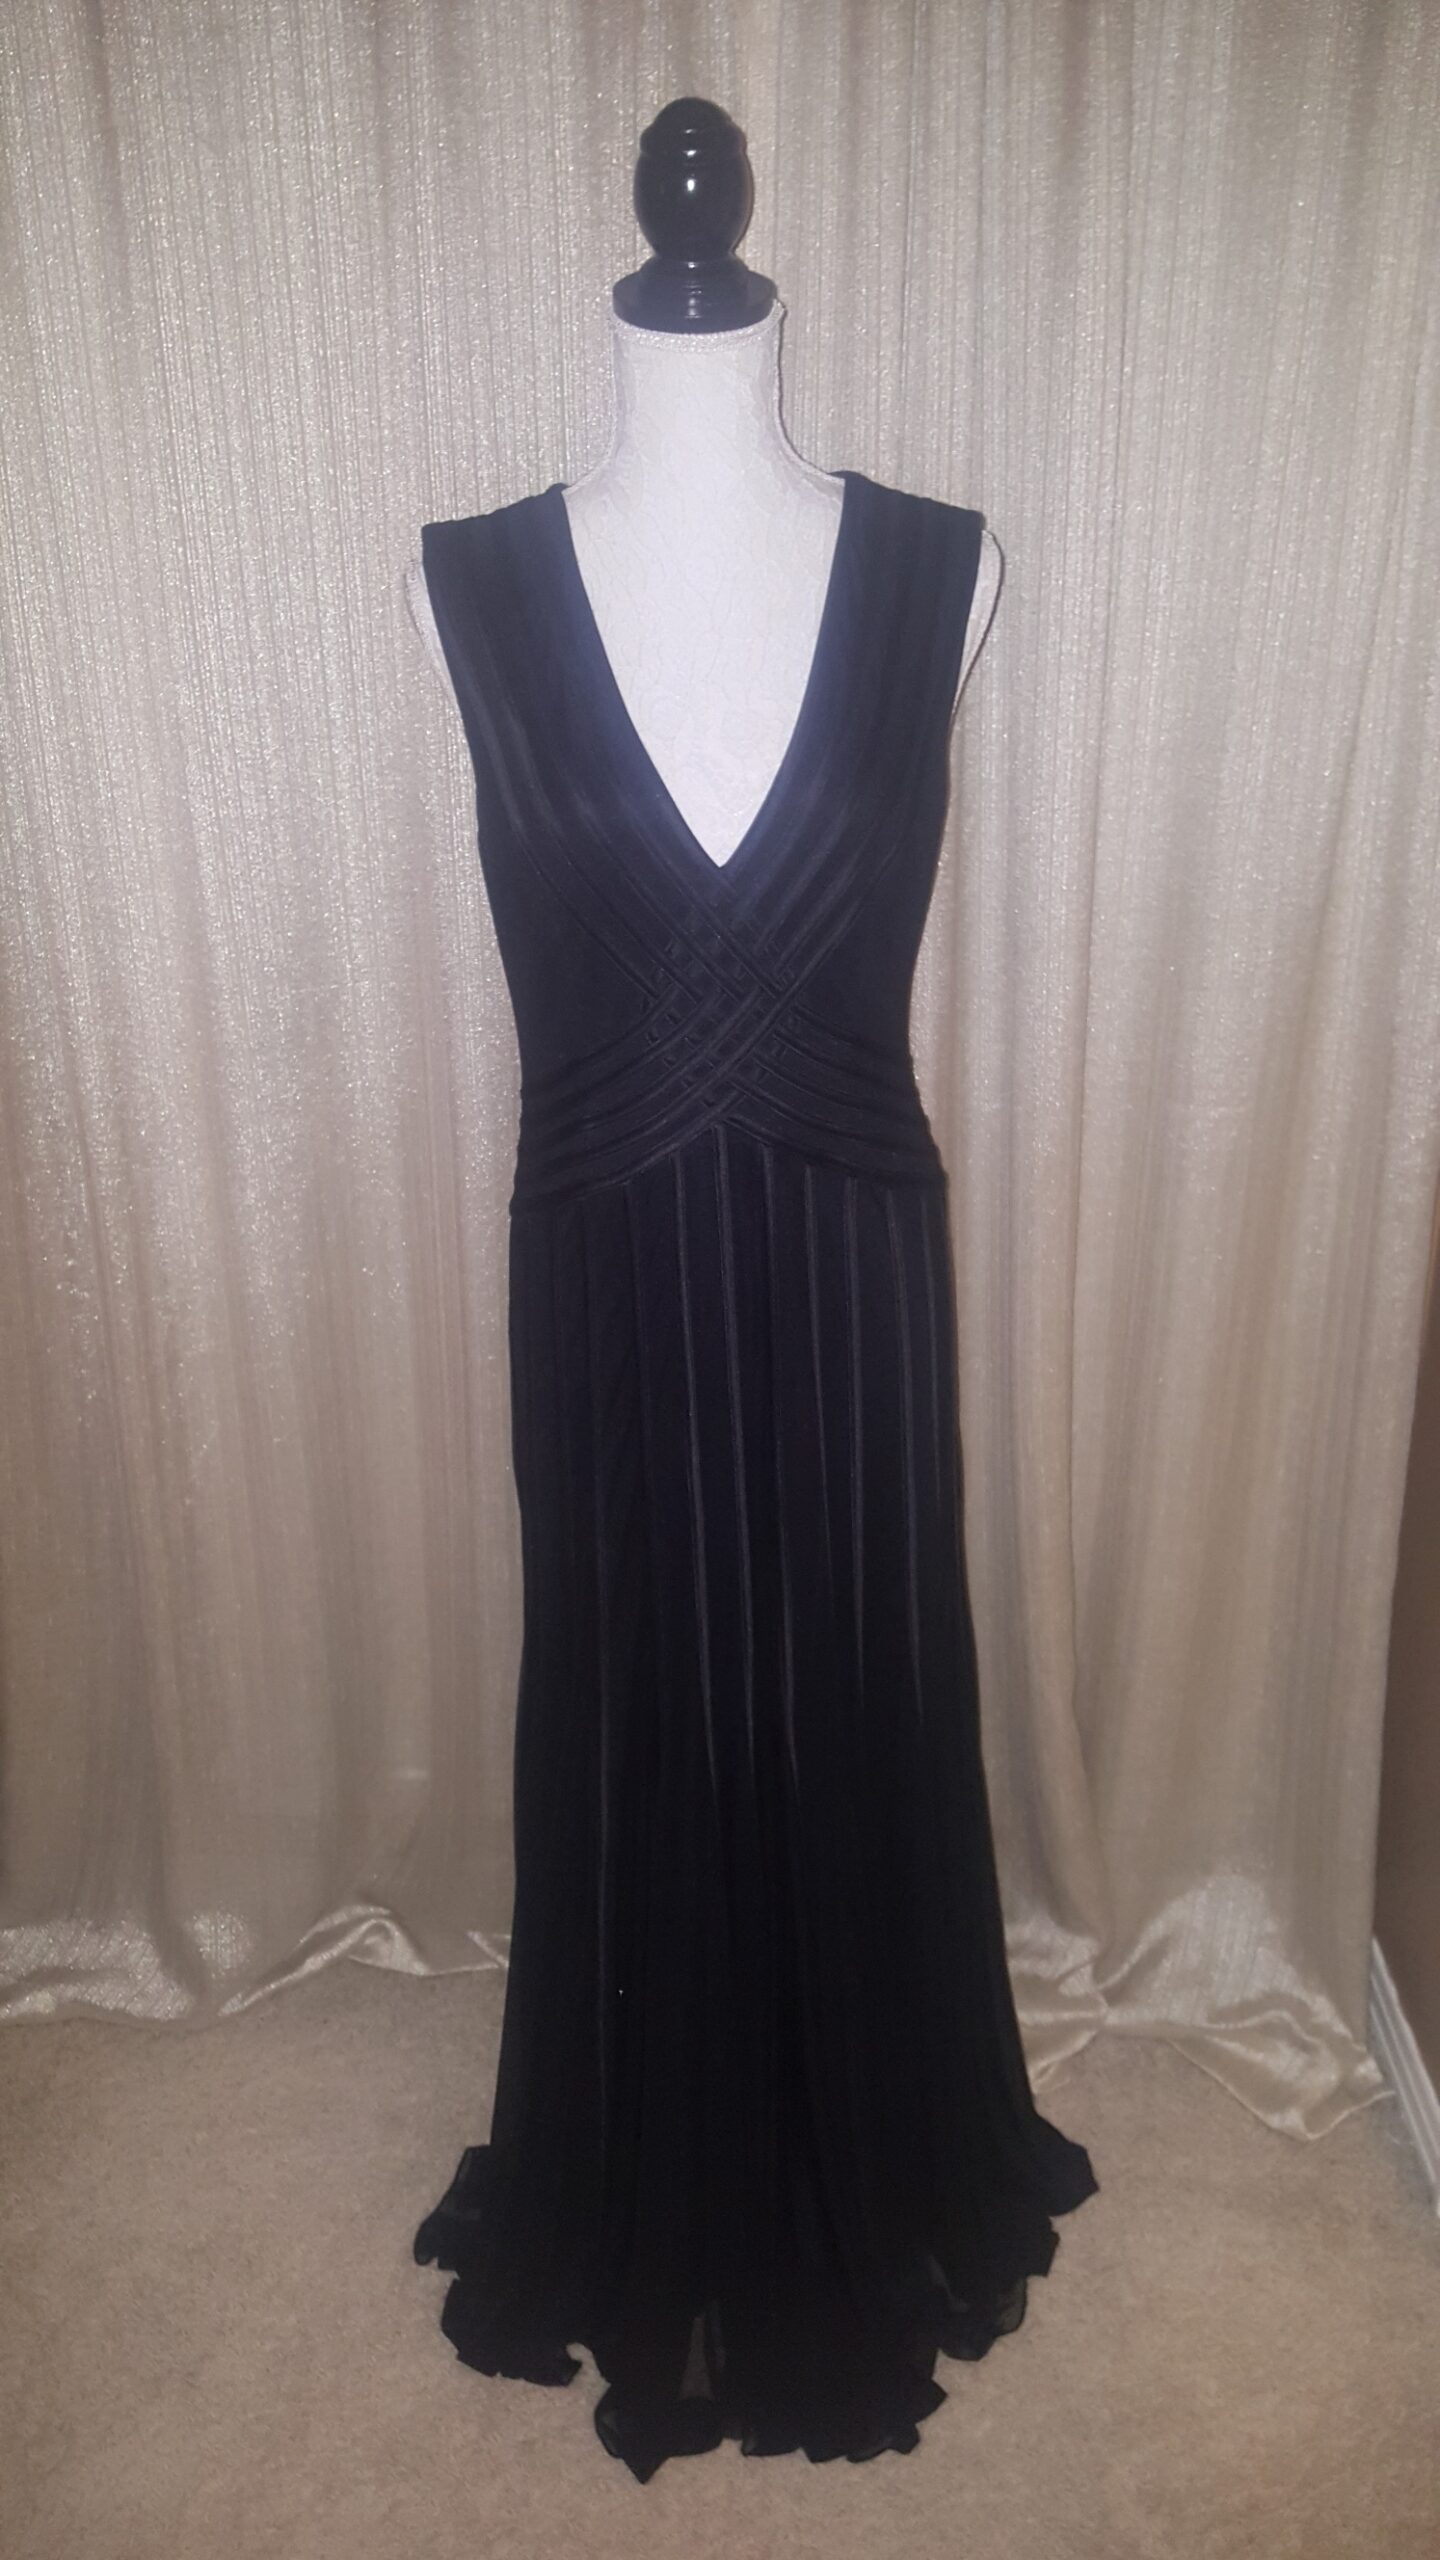 Xscape by Joanne Chen, Evening Gown, size 12, $40 – Desirée Consignment ...